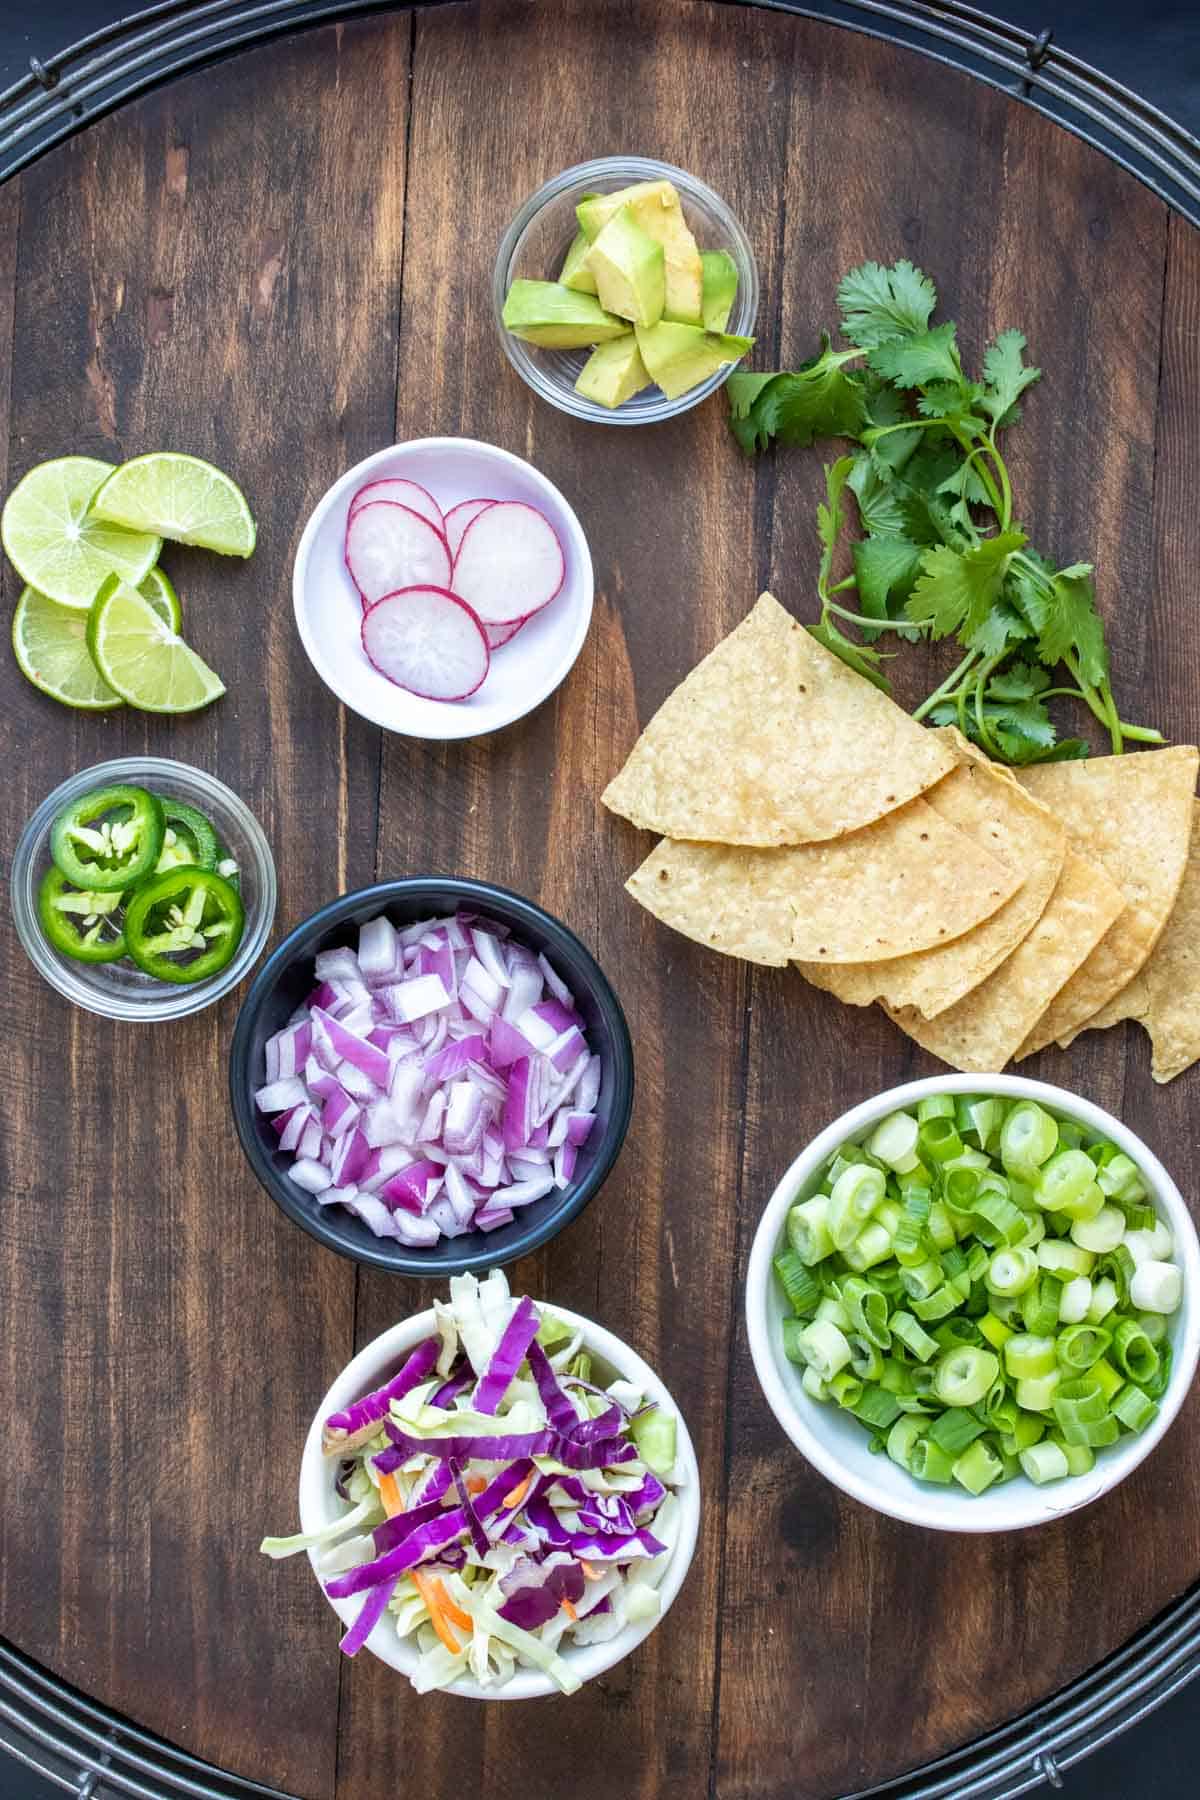 Toppings laid out on a wooden surface that you can use for pozole soup.